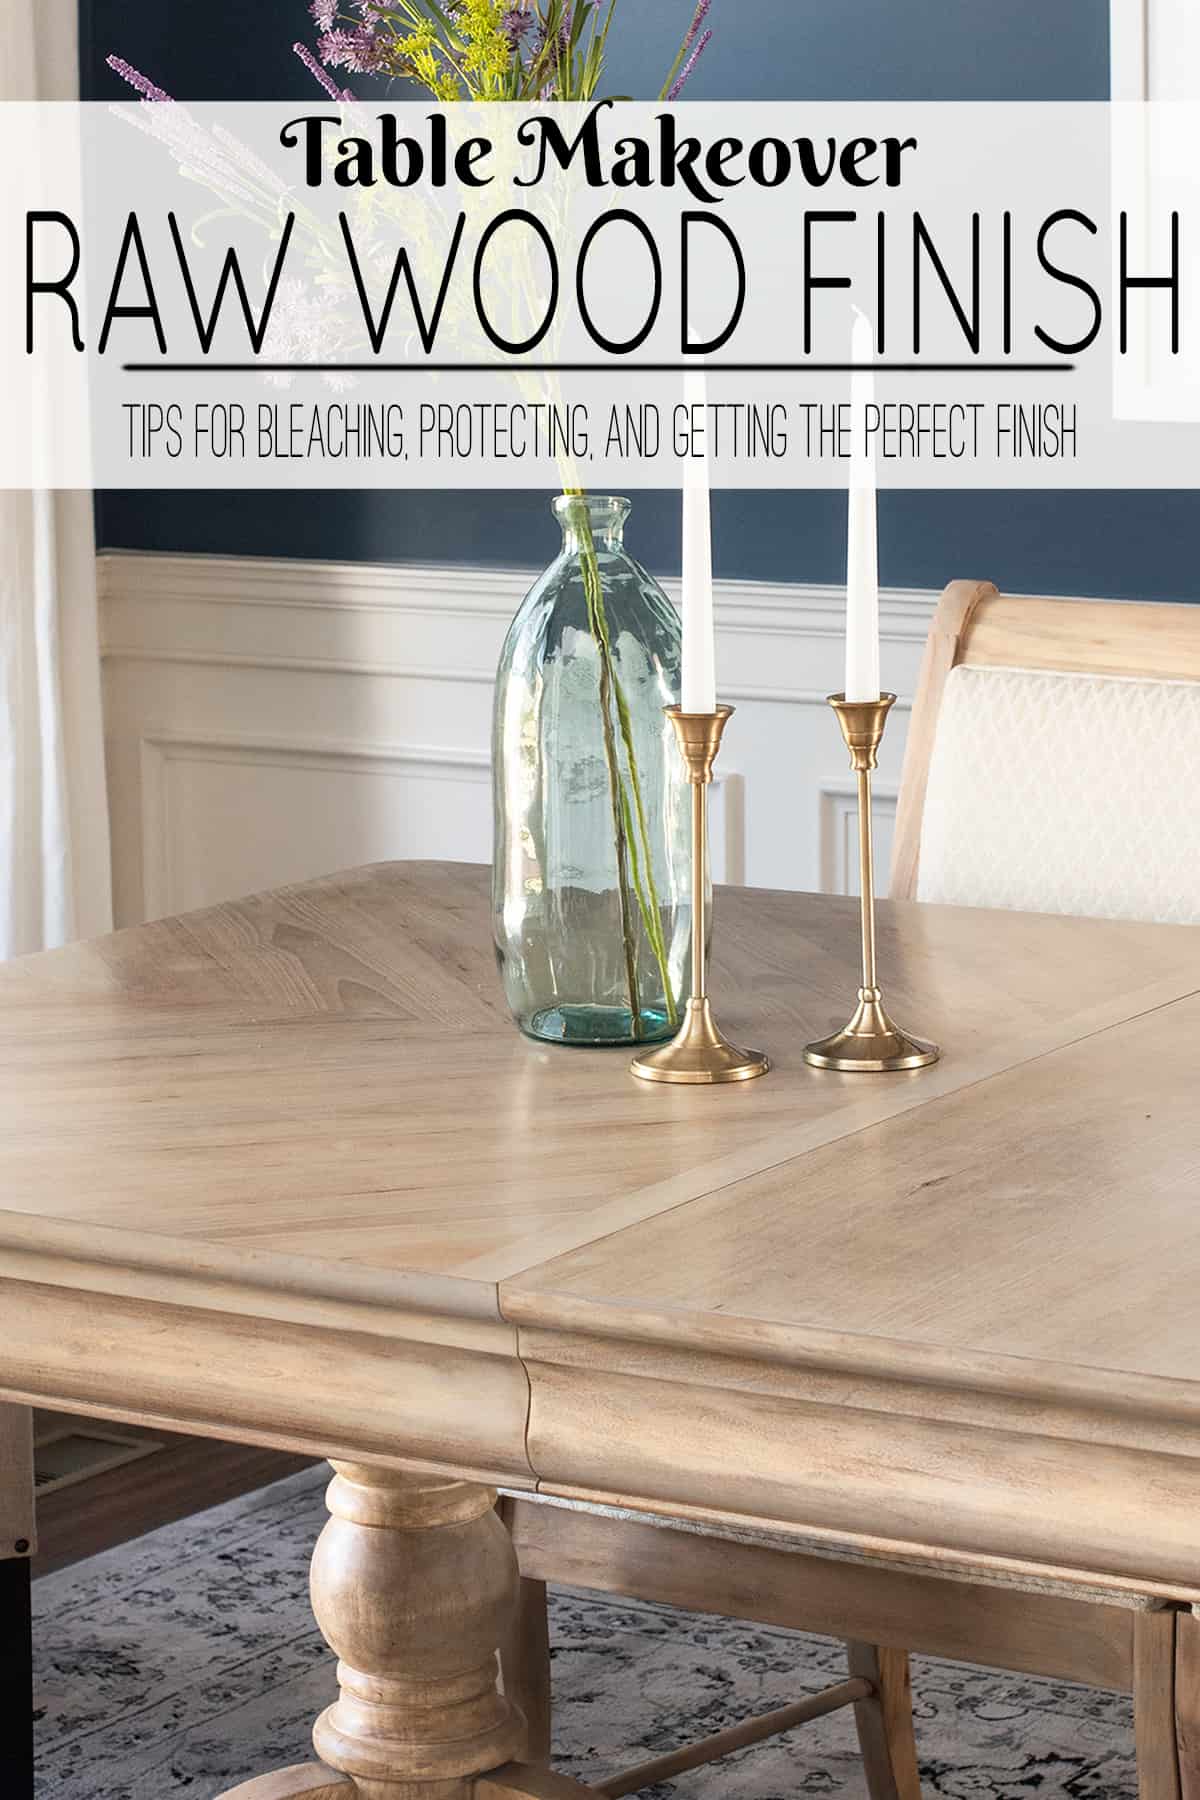 Raw Wood Table Makeover. Photo of natural finish dining room table with two brass candlesticks and glass bud vase at center.